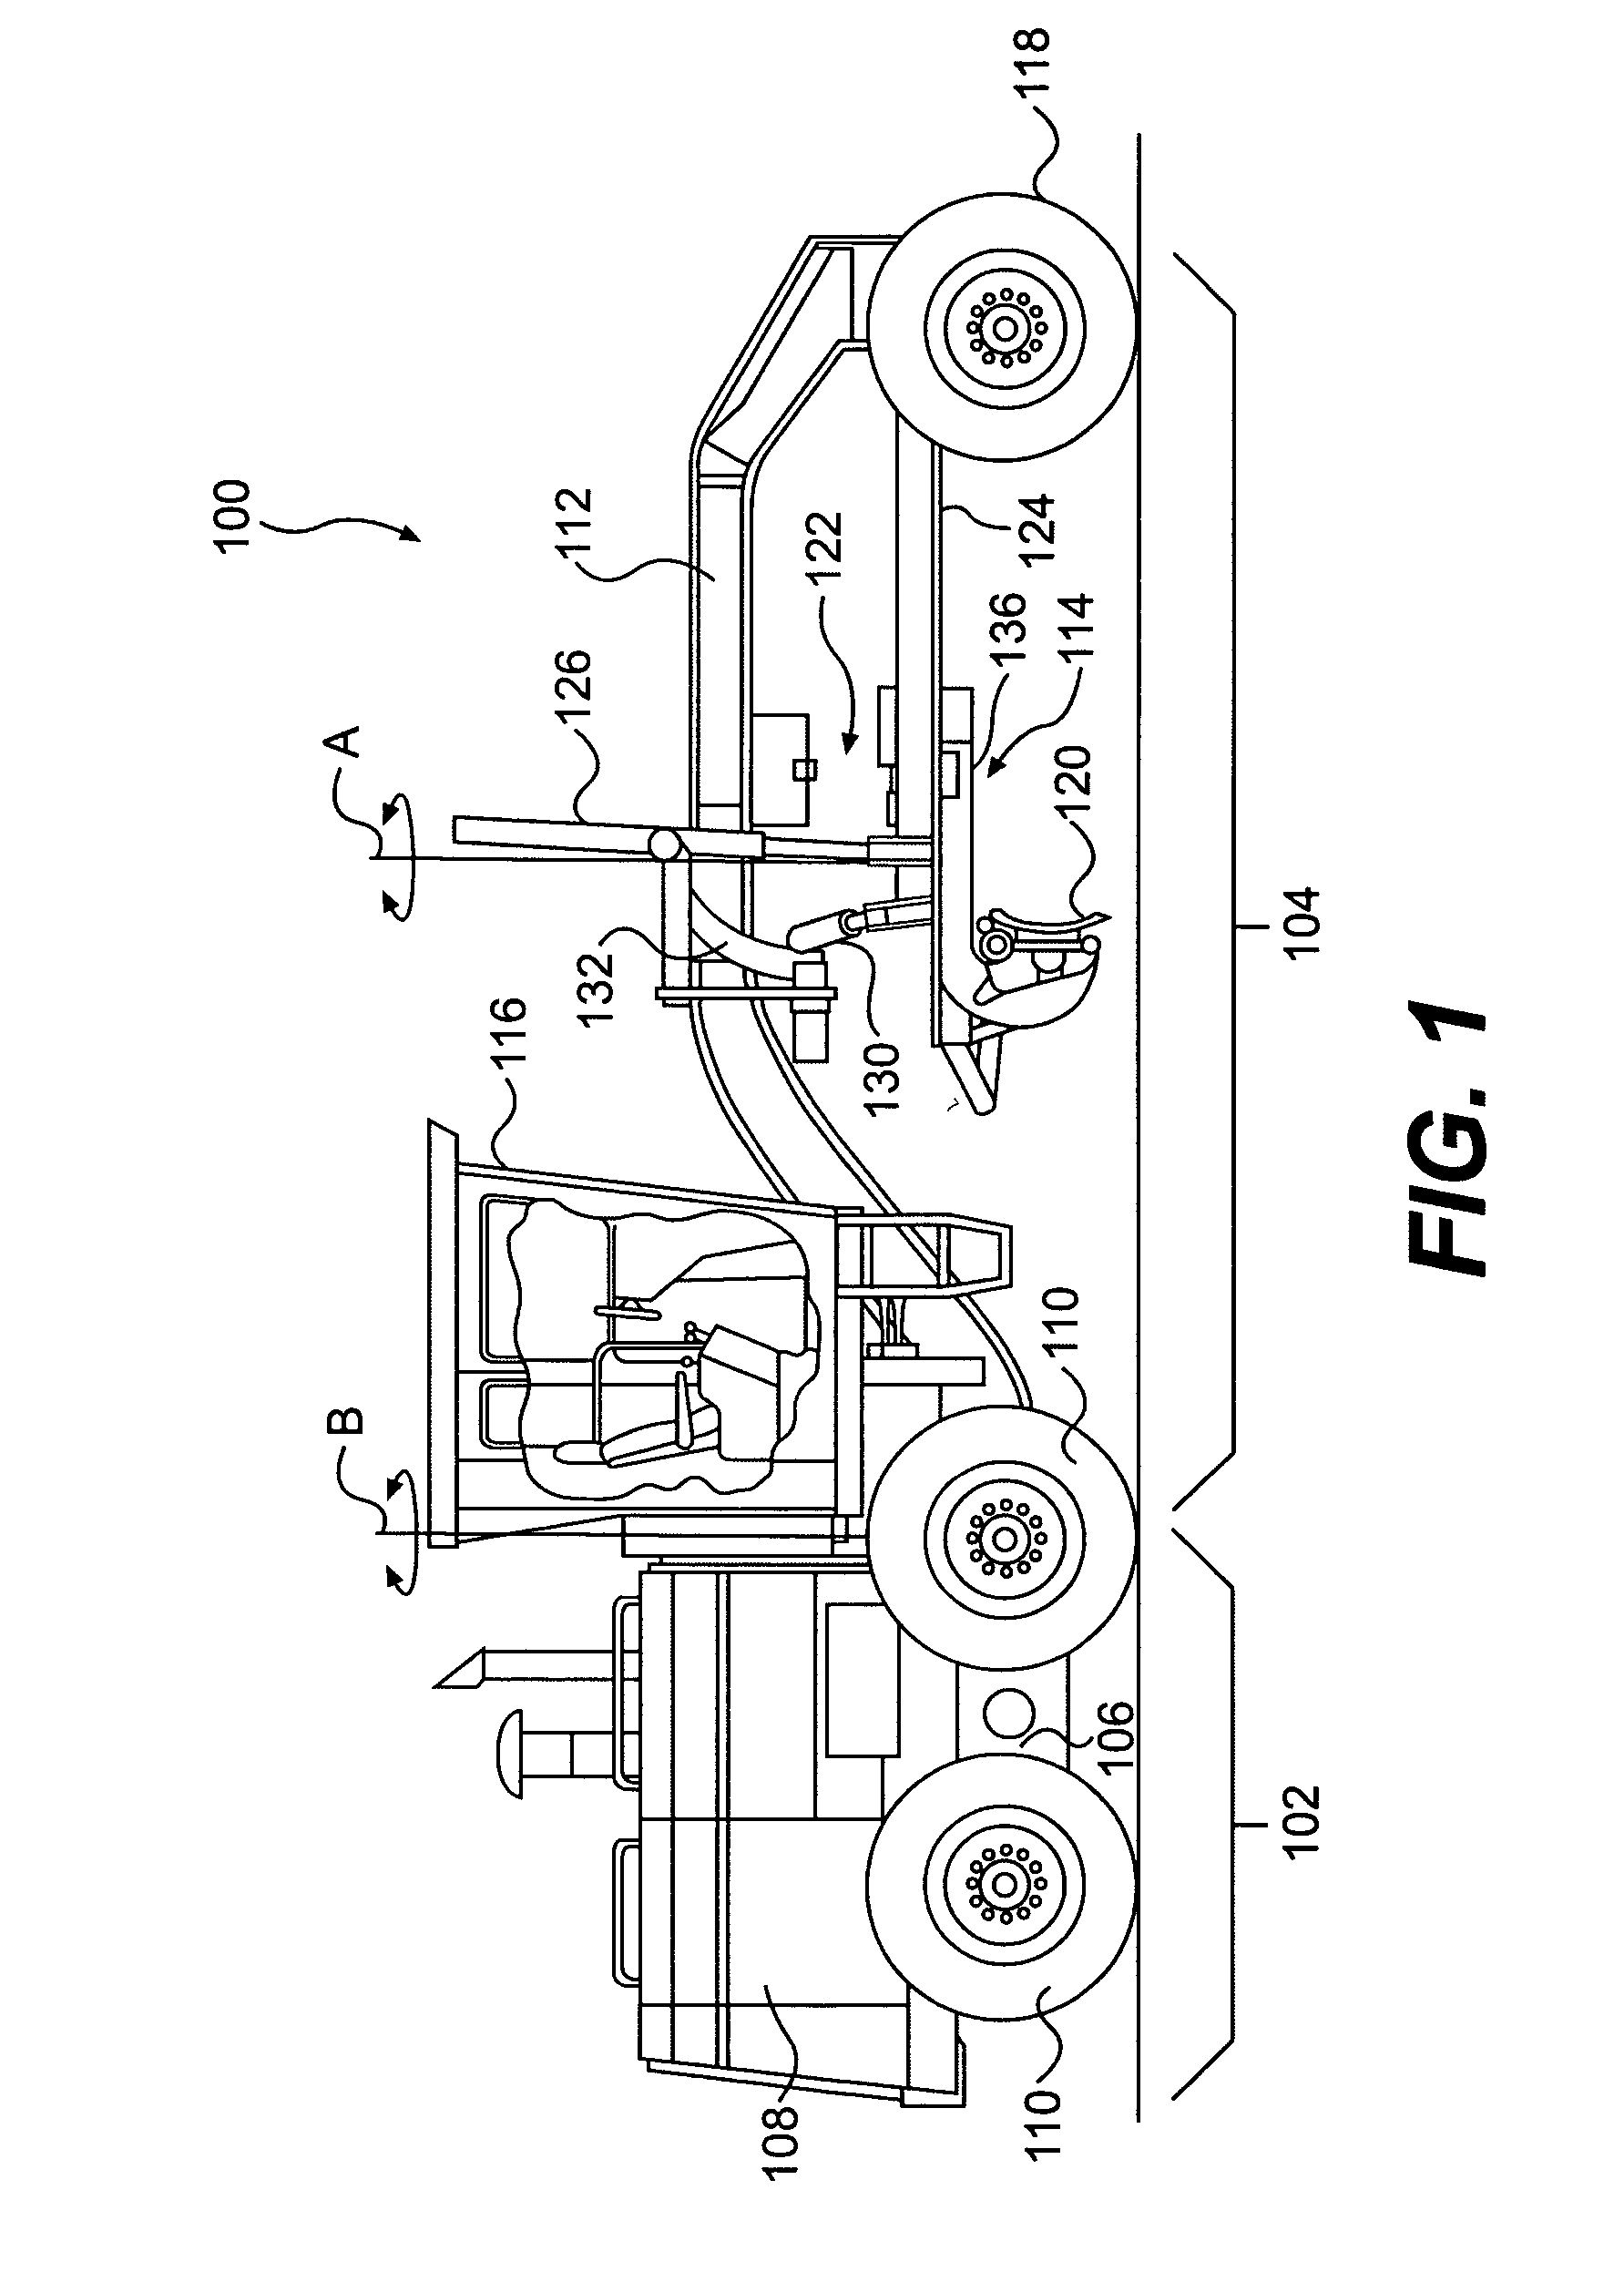 Front-wheel drive steering compensation method and system